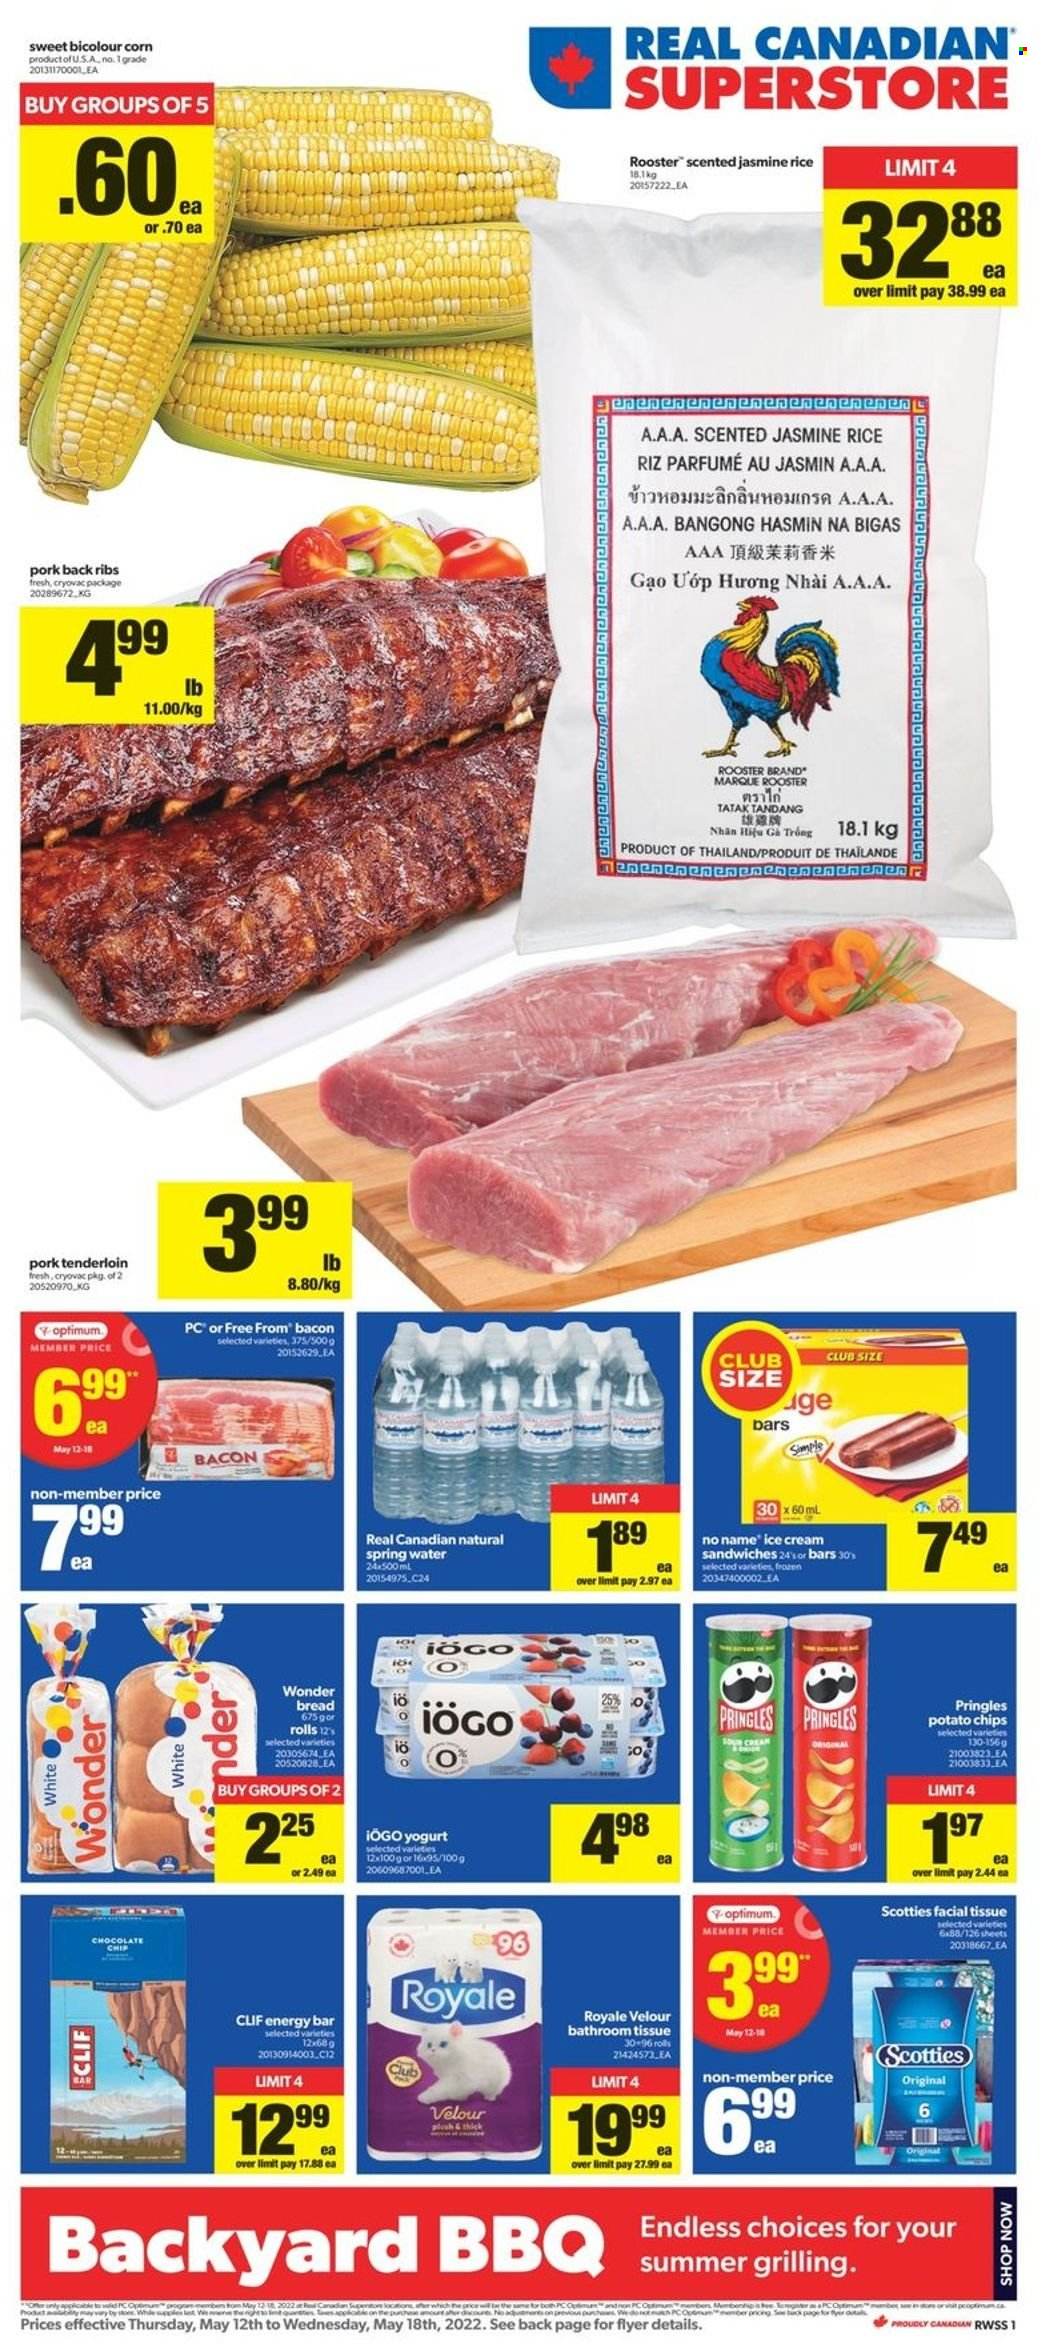 thumbnail - Real Canadian Superstore Flyer - May 12, 2022 - May 18, 2022 - Sales products - bread, corn, No Name, bacon, yoghurt, ice cream, ice cream sandwich, potato chips, Pringles, rice, jasmine rice, spring water, pork meat, pork ribs, pork tenderloin, pork back ribs, bath tissue, Optimum. Page 1.